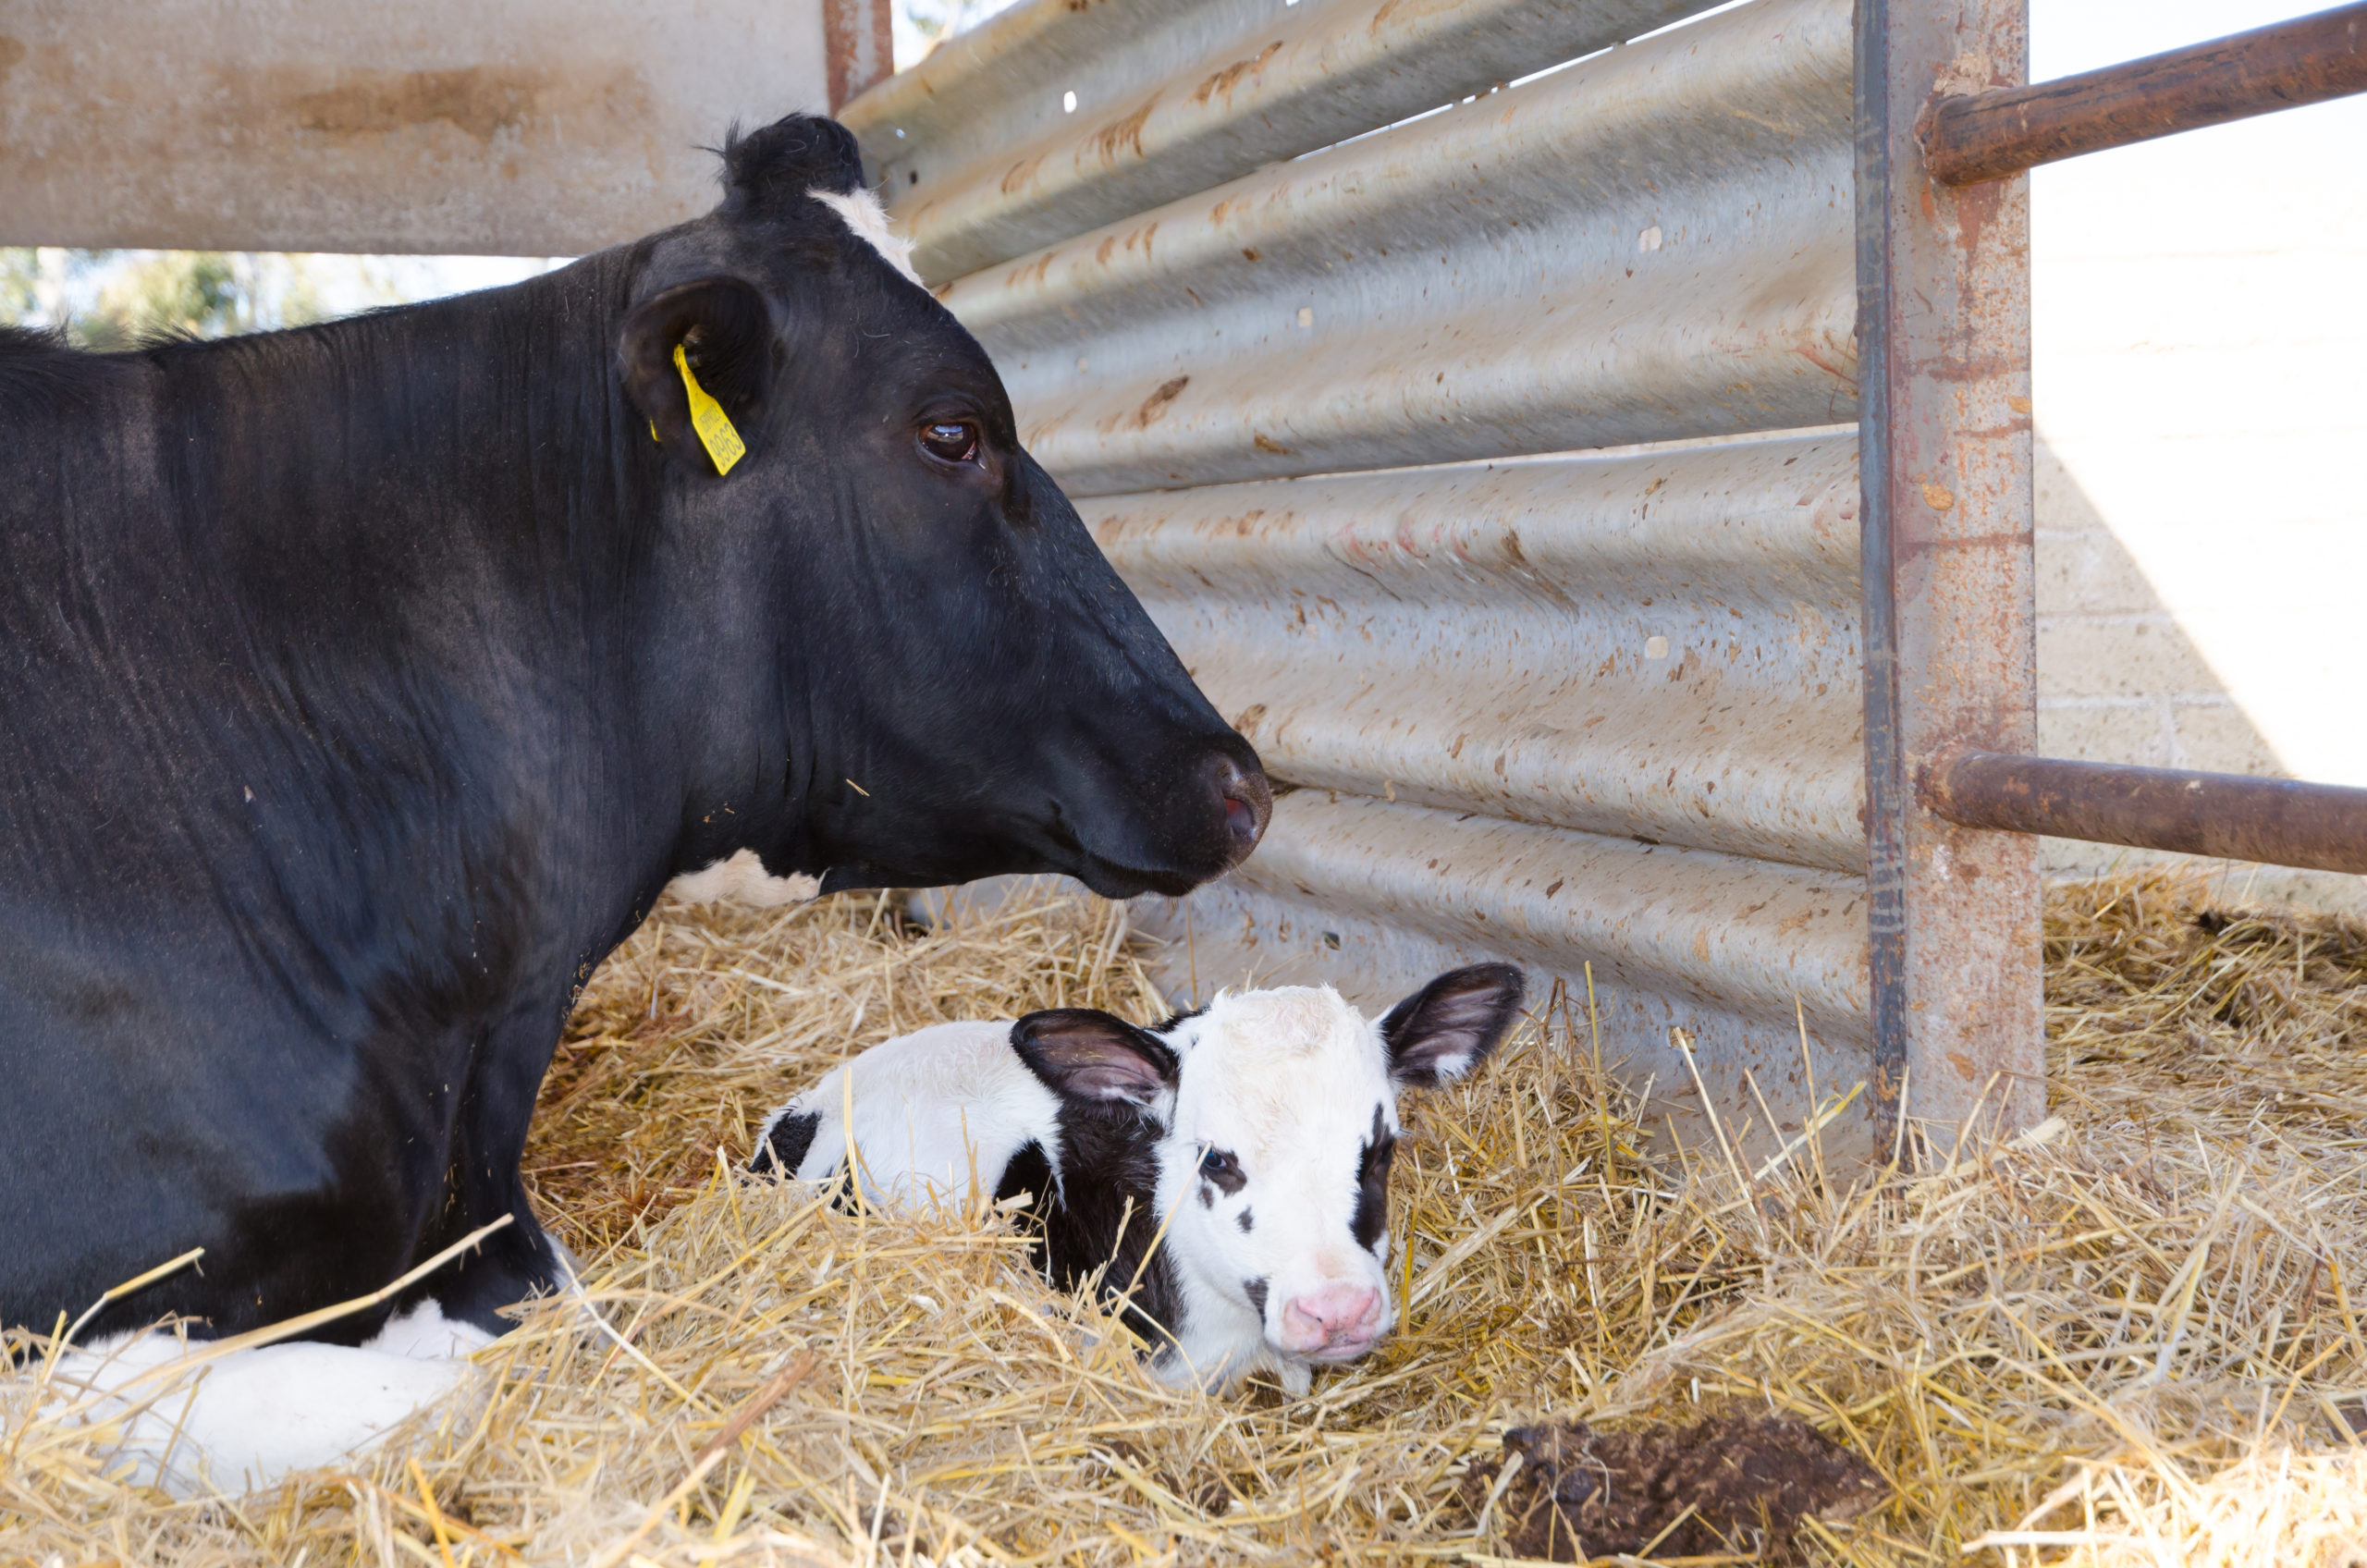 Contact matters for cow and calf